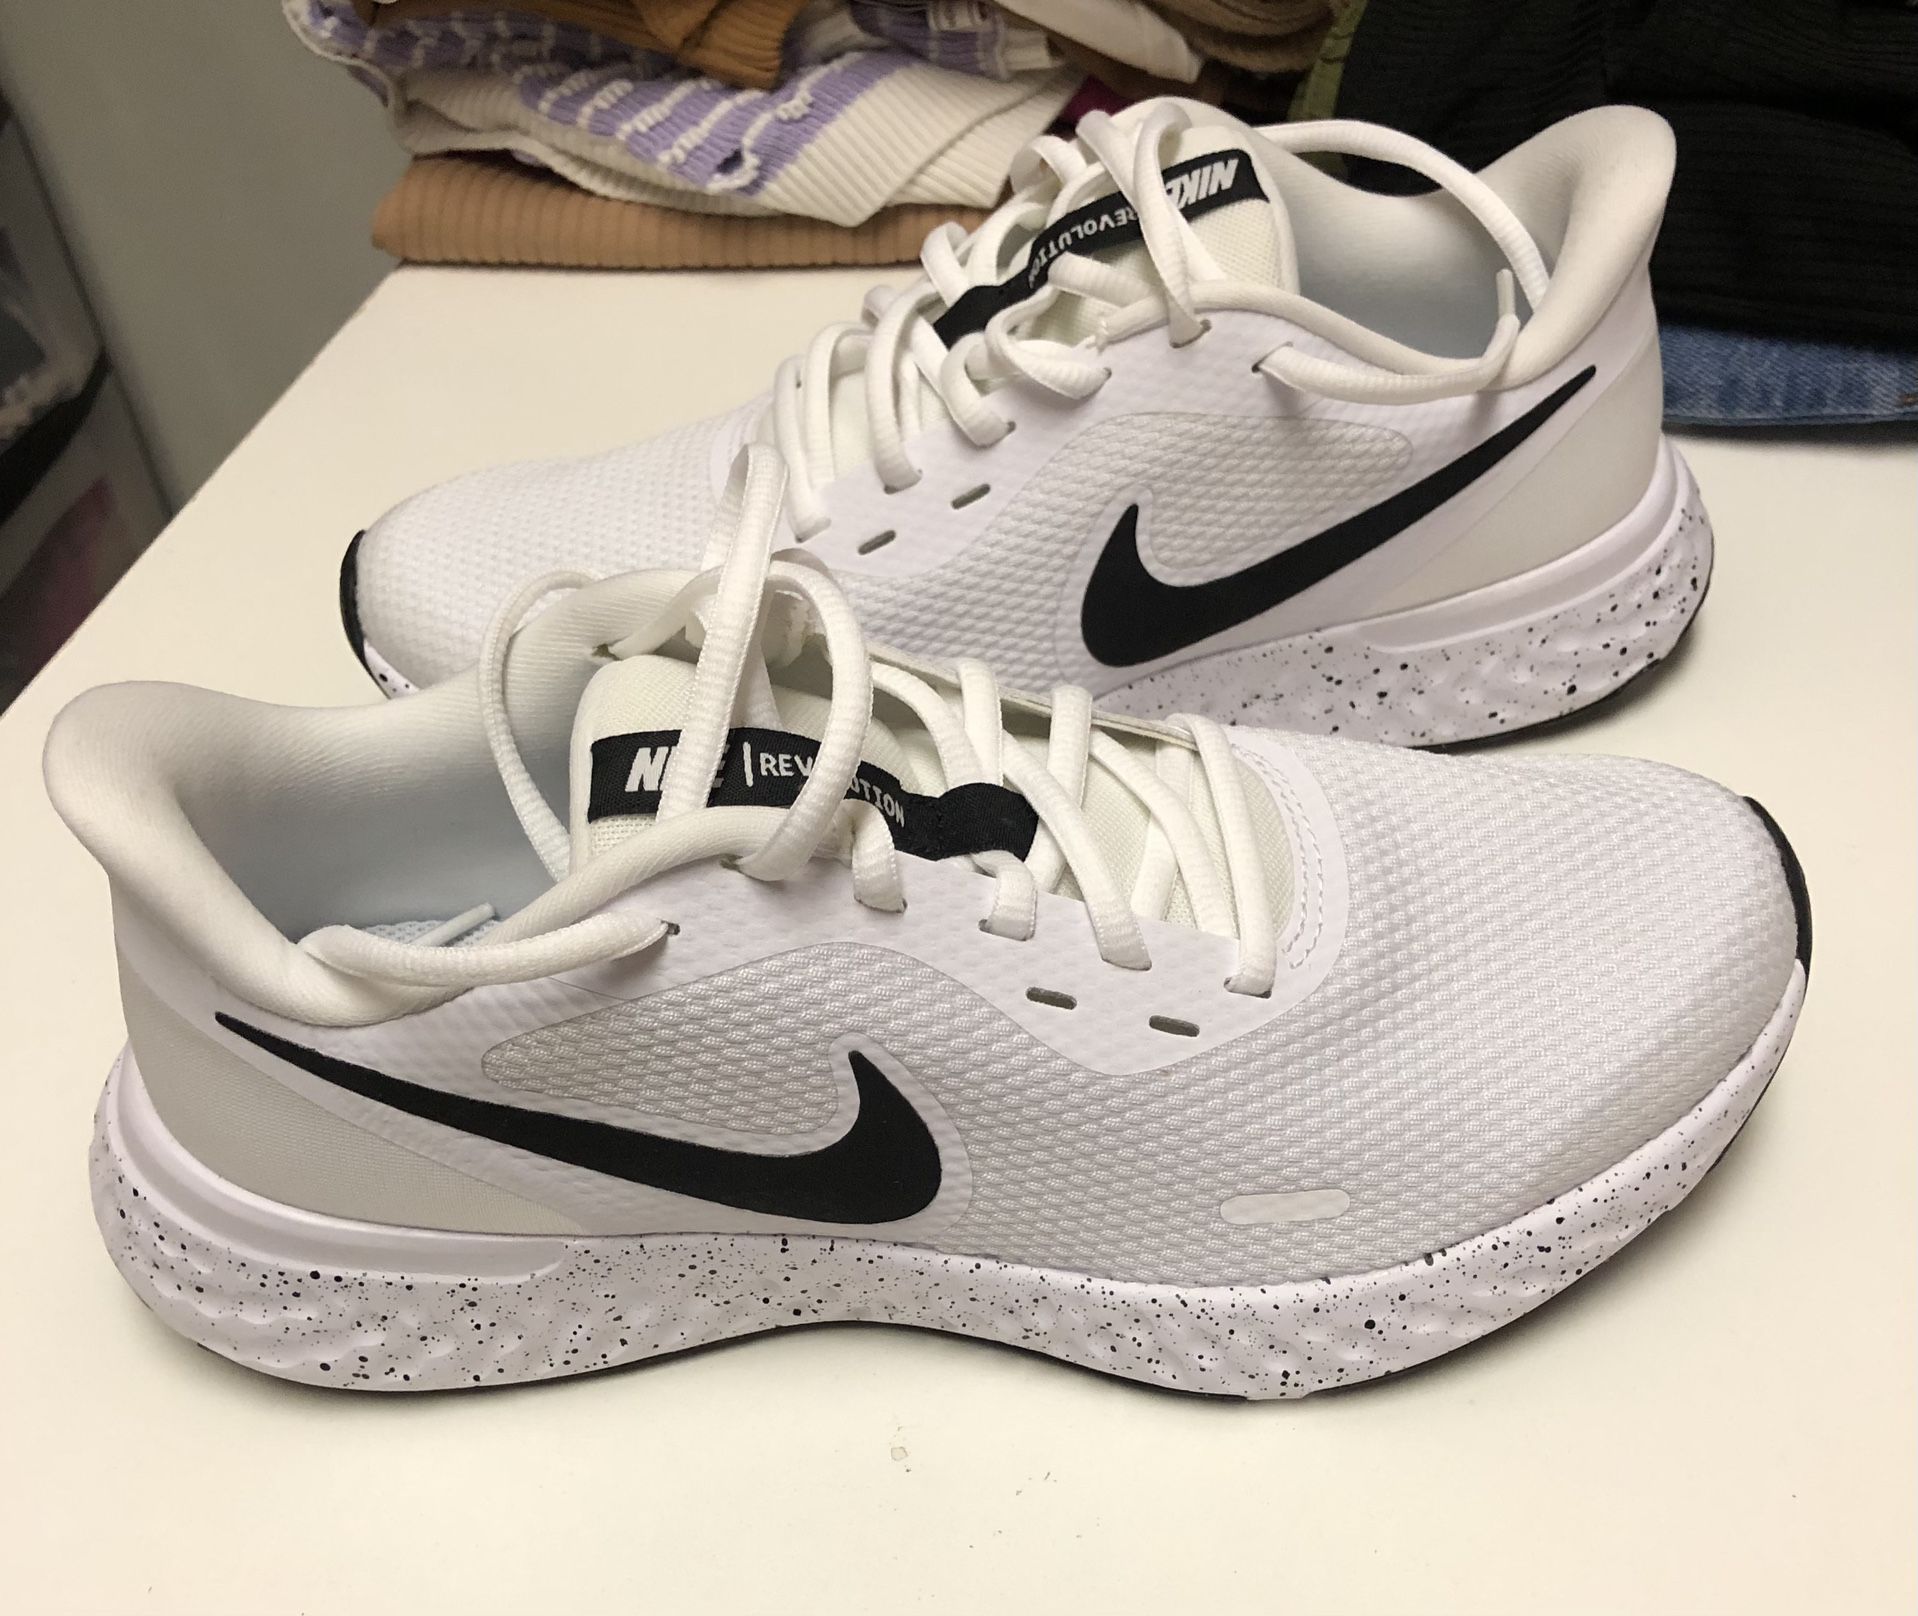 Brand New Nikes Shoes Size 8.5 Women 